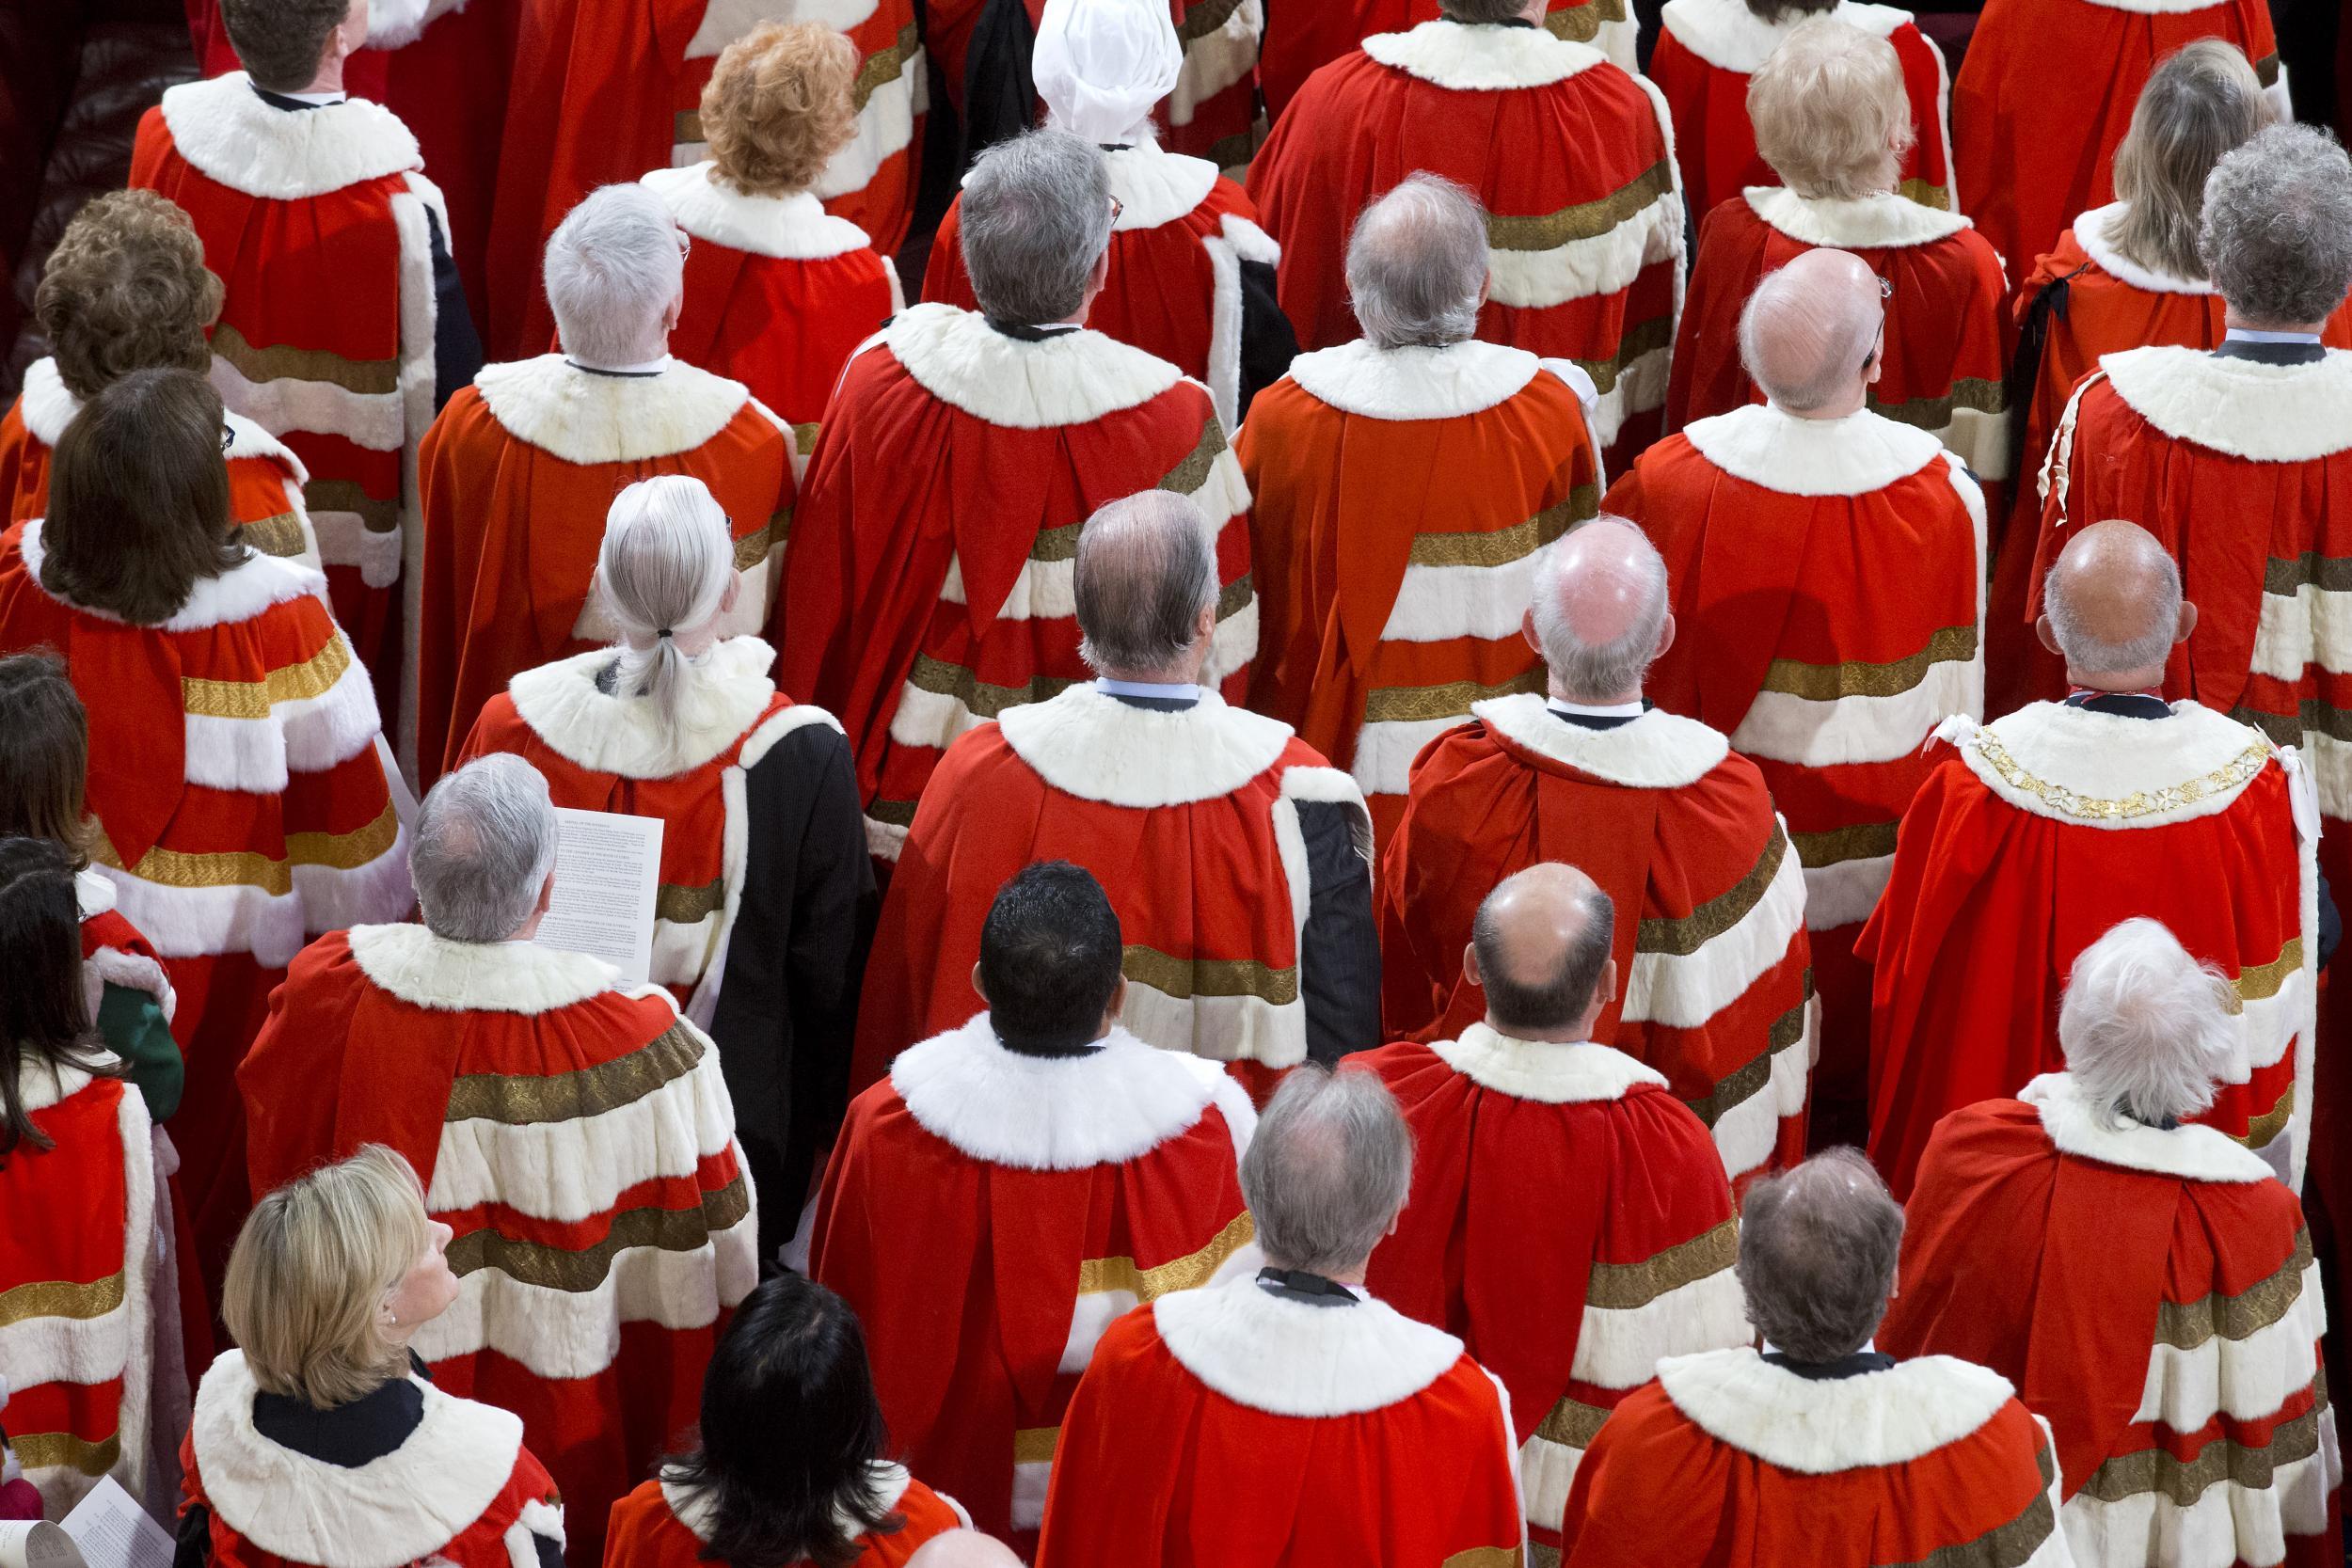 117 peers have not spoken in the chamber all year. Their days could be numbered